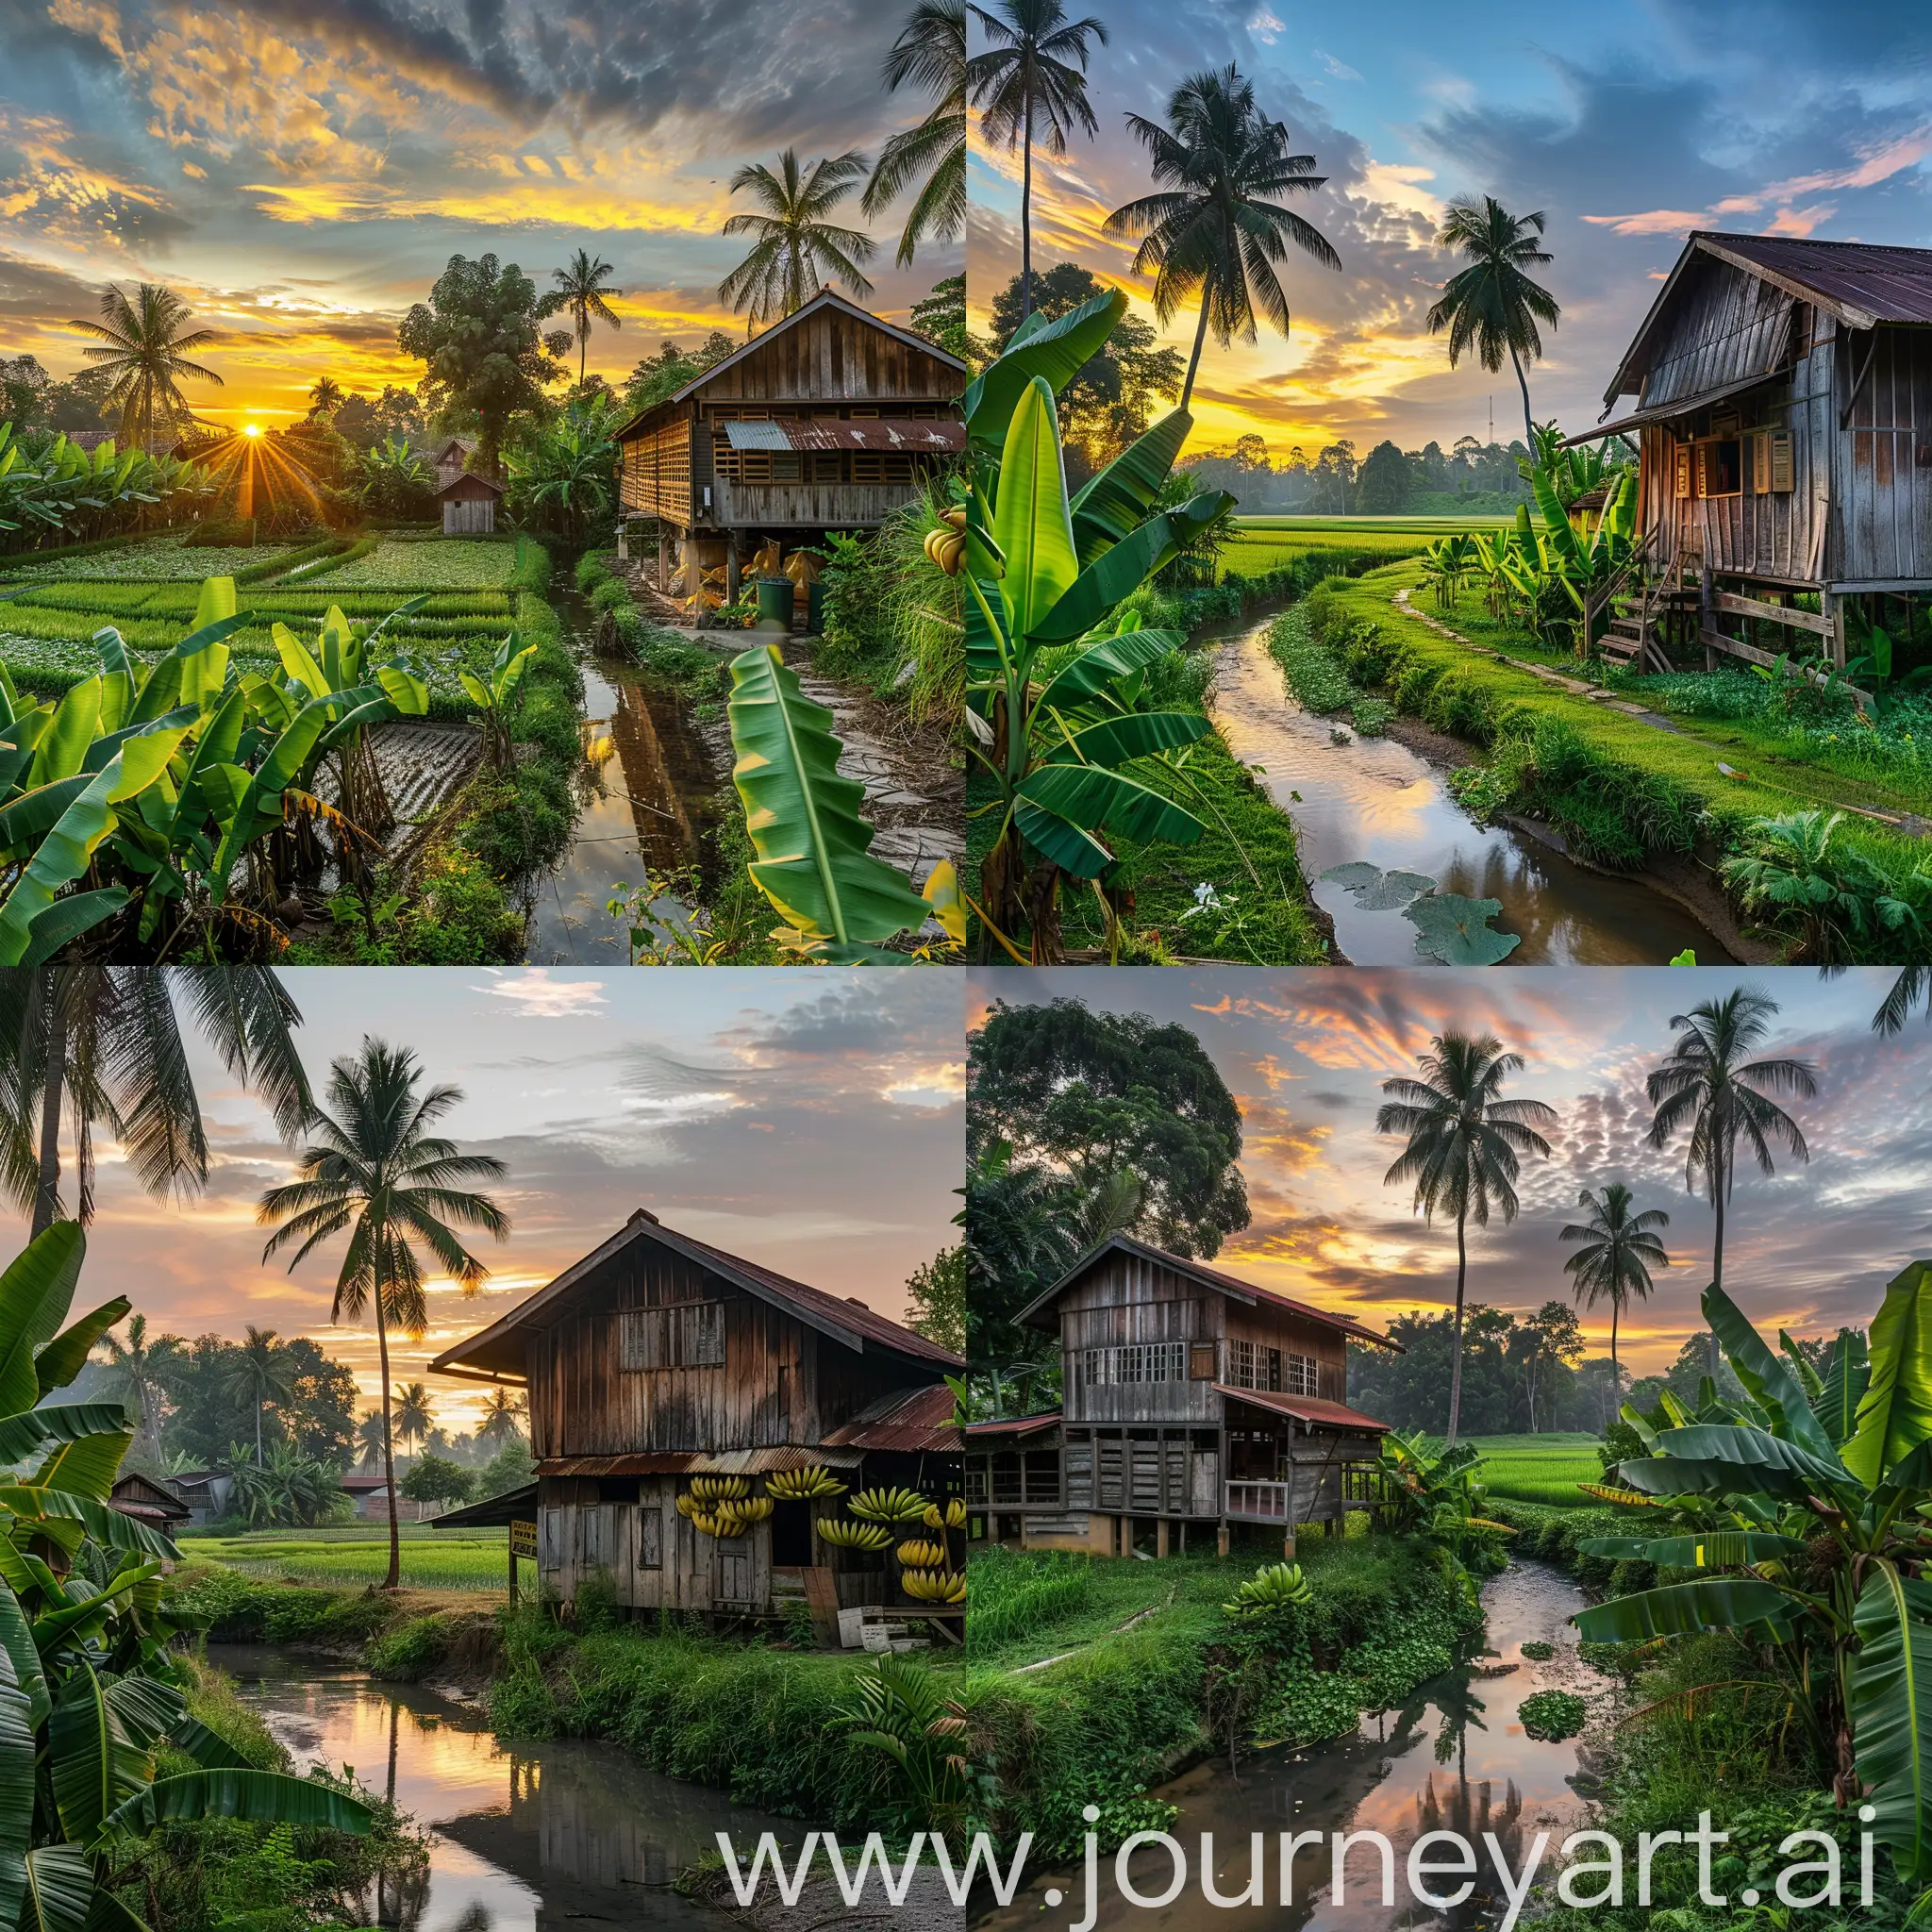 Tropical malay village in the morning. Malay wooden house, padi field, small river, banana trees, coconut trees, sunrise